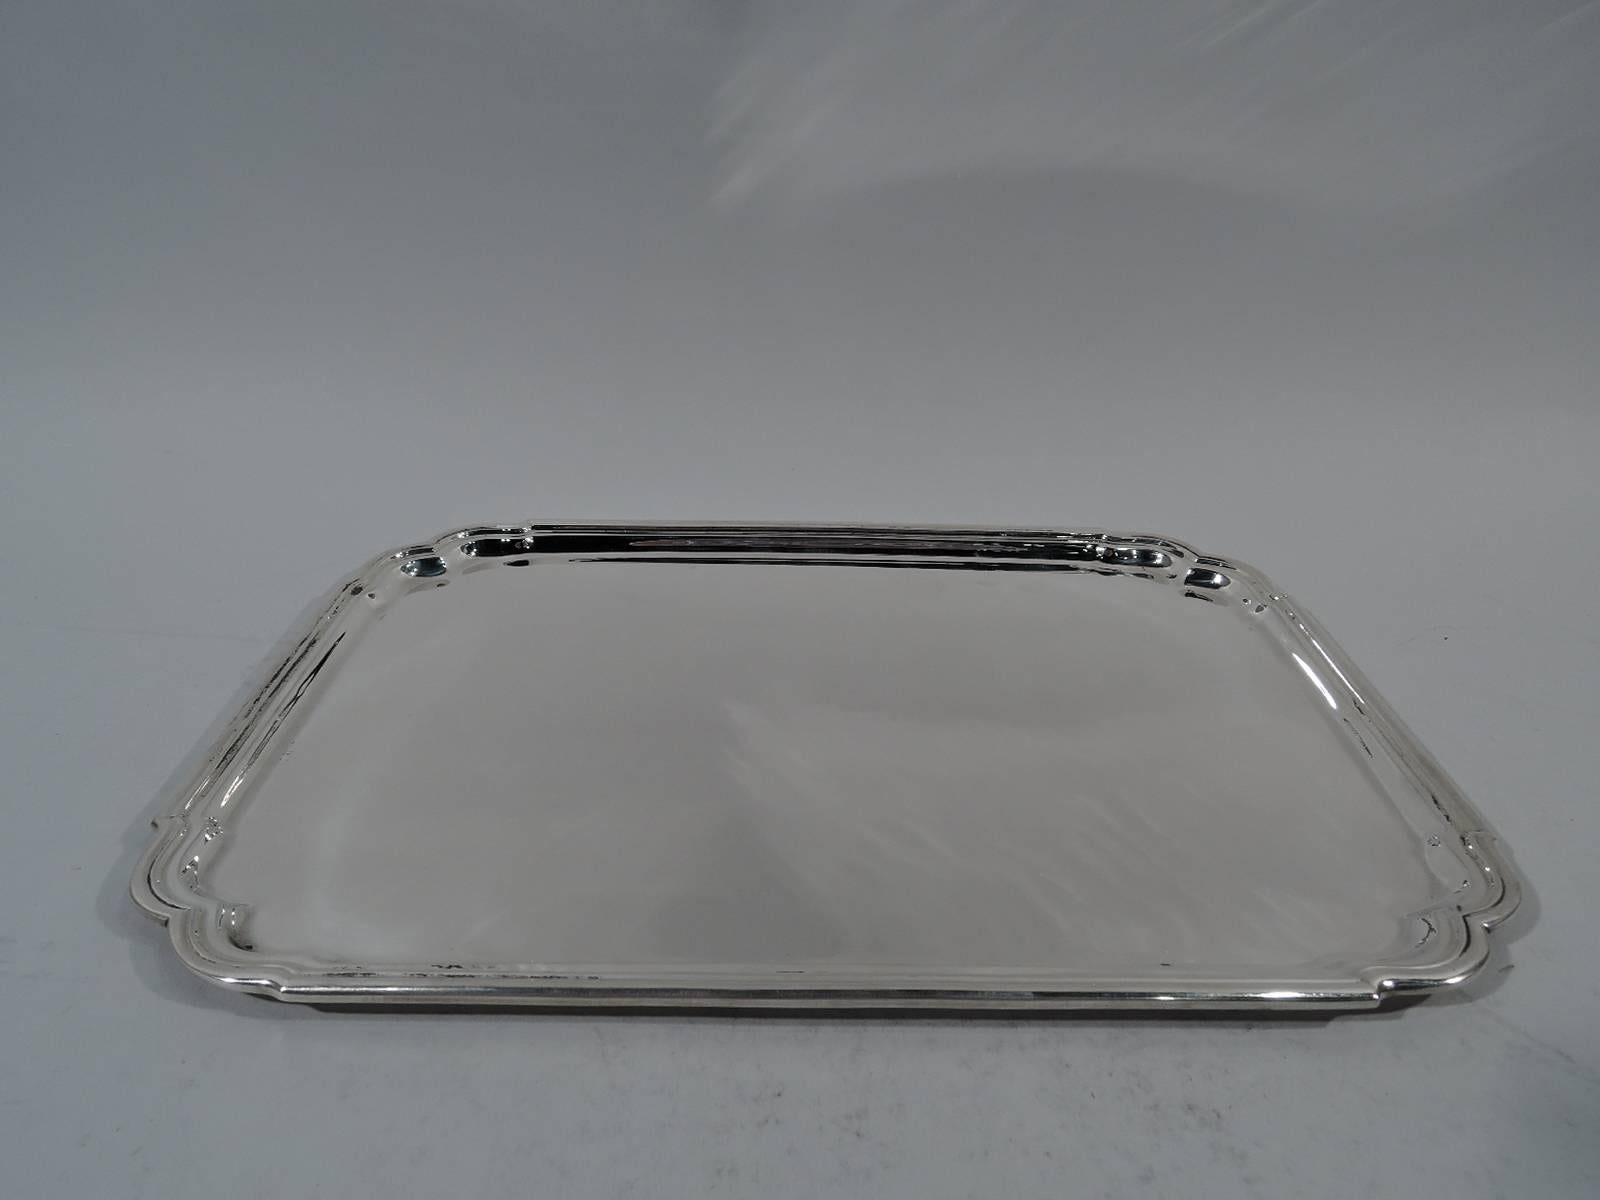 Georgian-inspired sterling silver tray. Made by Tiffany & Co. in New York. Rectangular with molded rim and double C-scroll corners. A great Midcentury take on 18th century design. Hallmark includes postwar pattern no. 23967. Measure: Weight 34.7